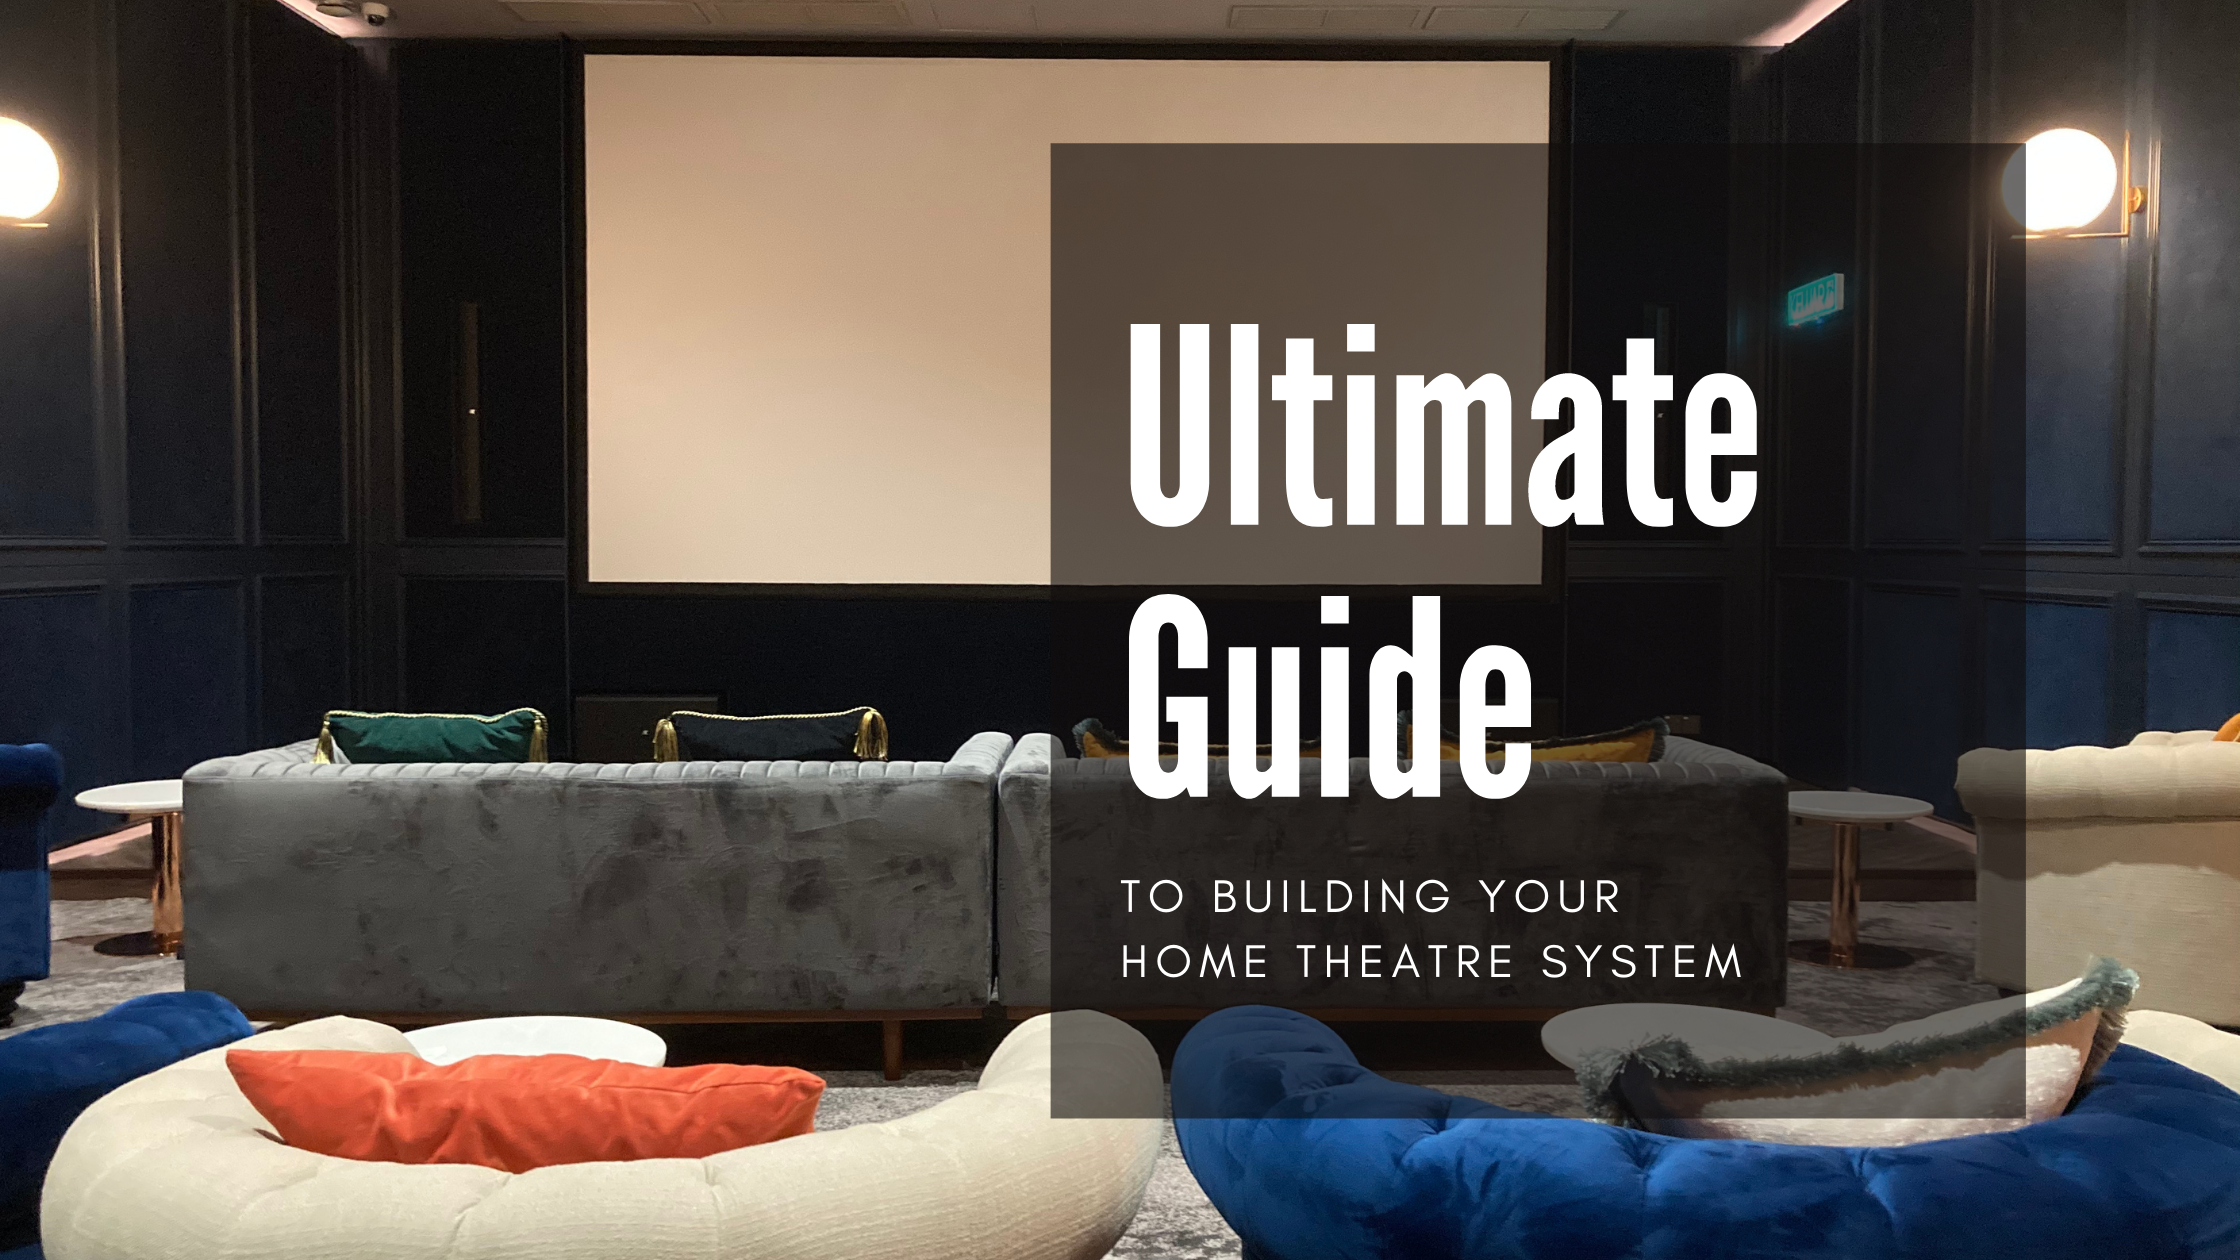 Ultimate Guide to Building Your Home Theatre System